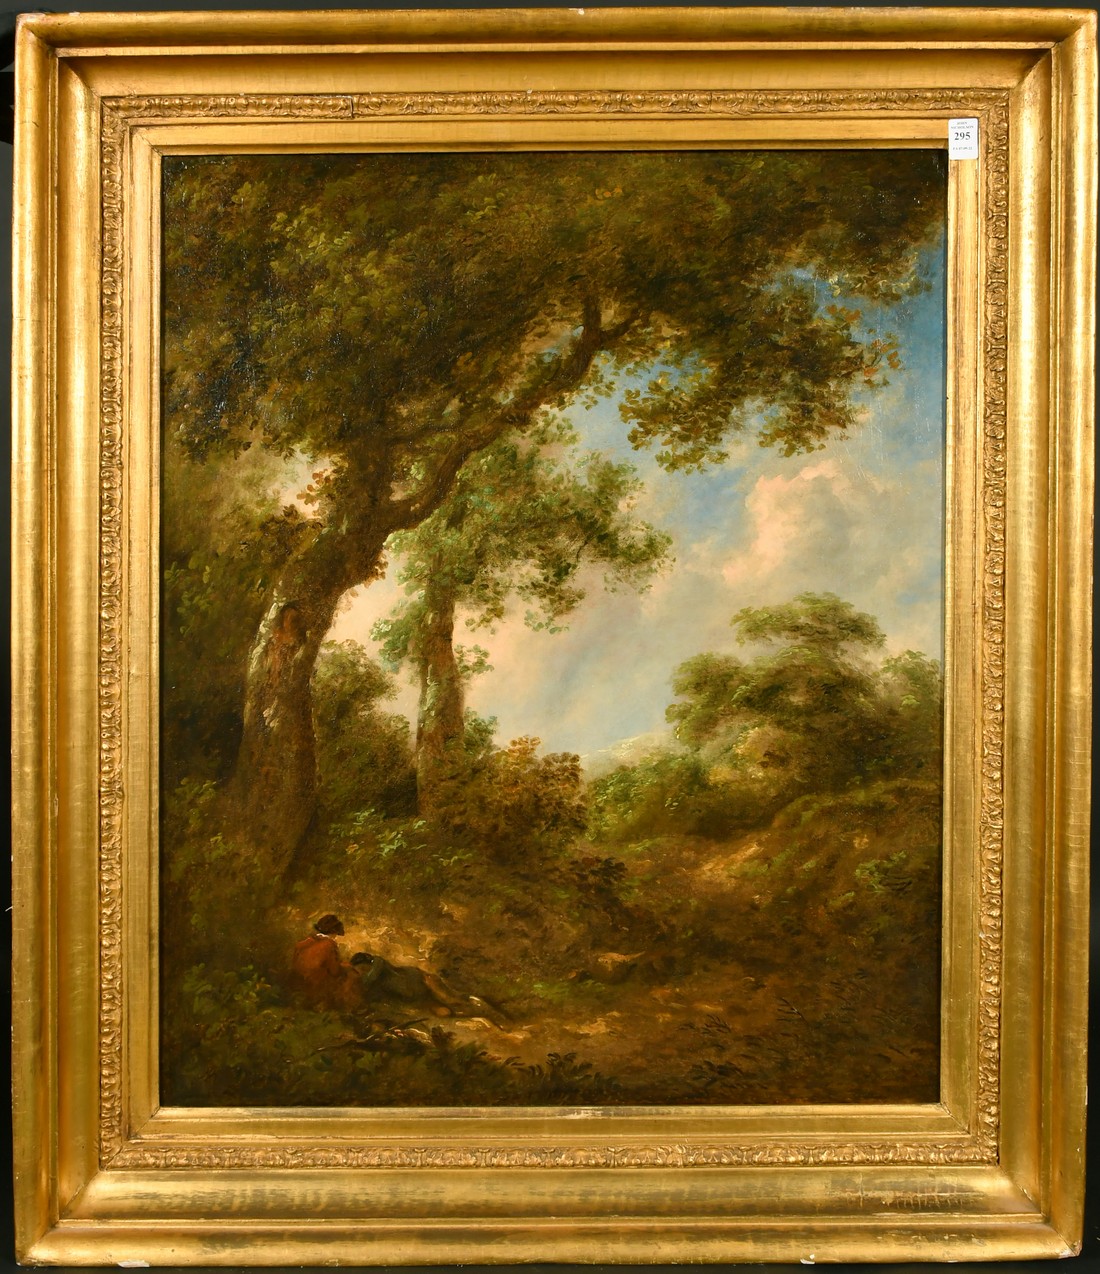 Circle of Constable, A wooded landscape with figures resting beneath a tree, oil on canvas, 30" x - Image 2 of 3